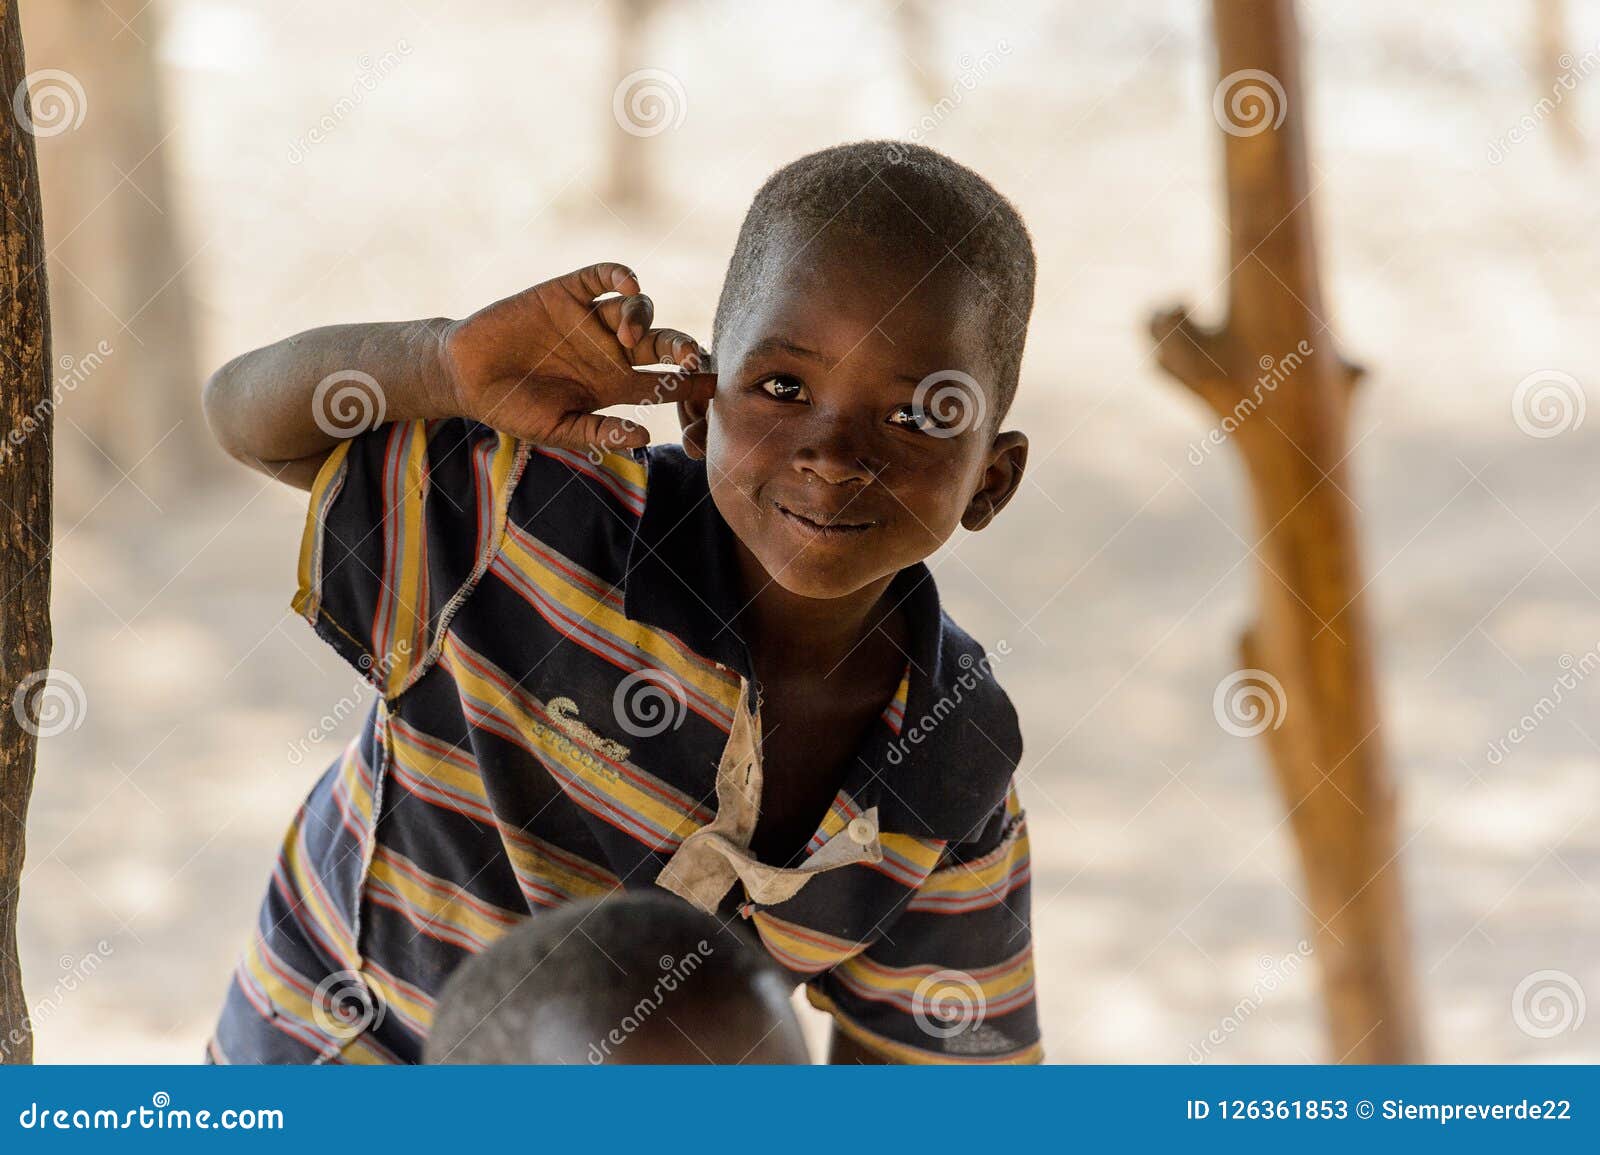 Unidentified Ghanaian Boy in Striped Shirt Smiles in the Ghani ...